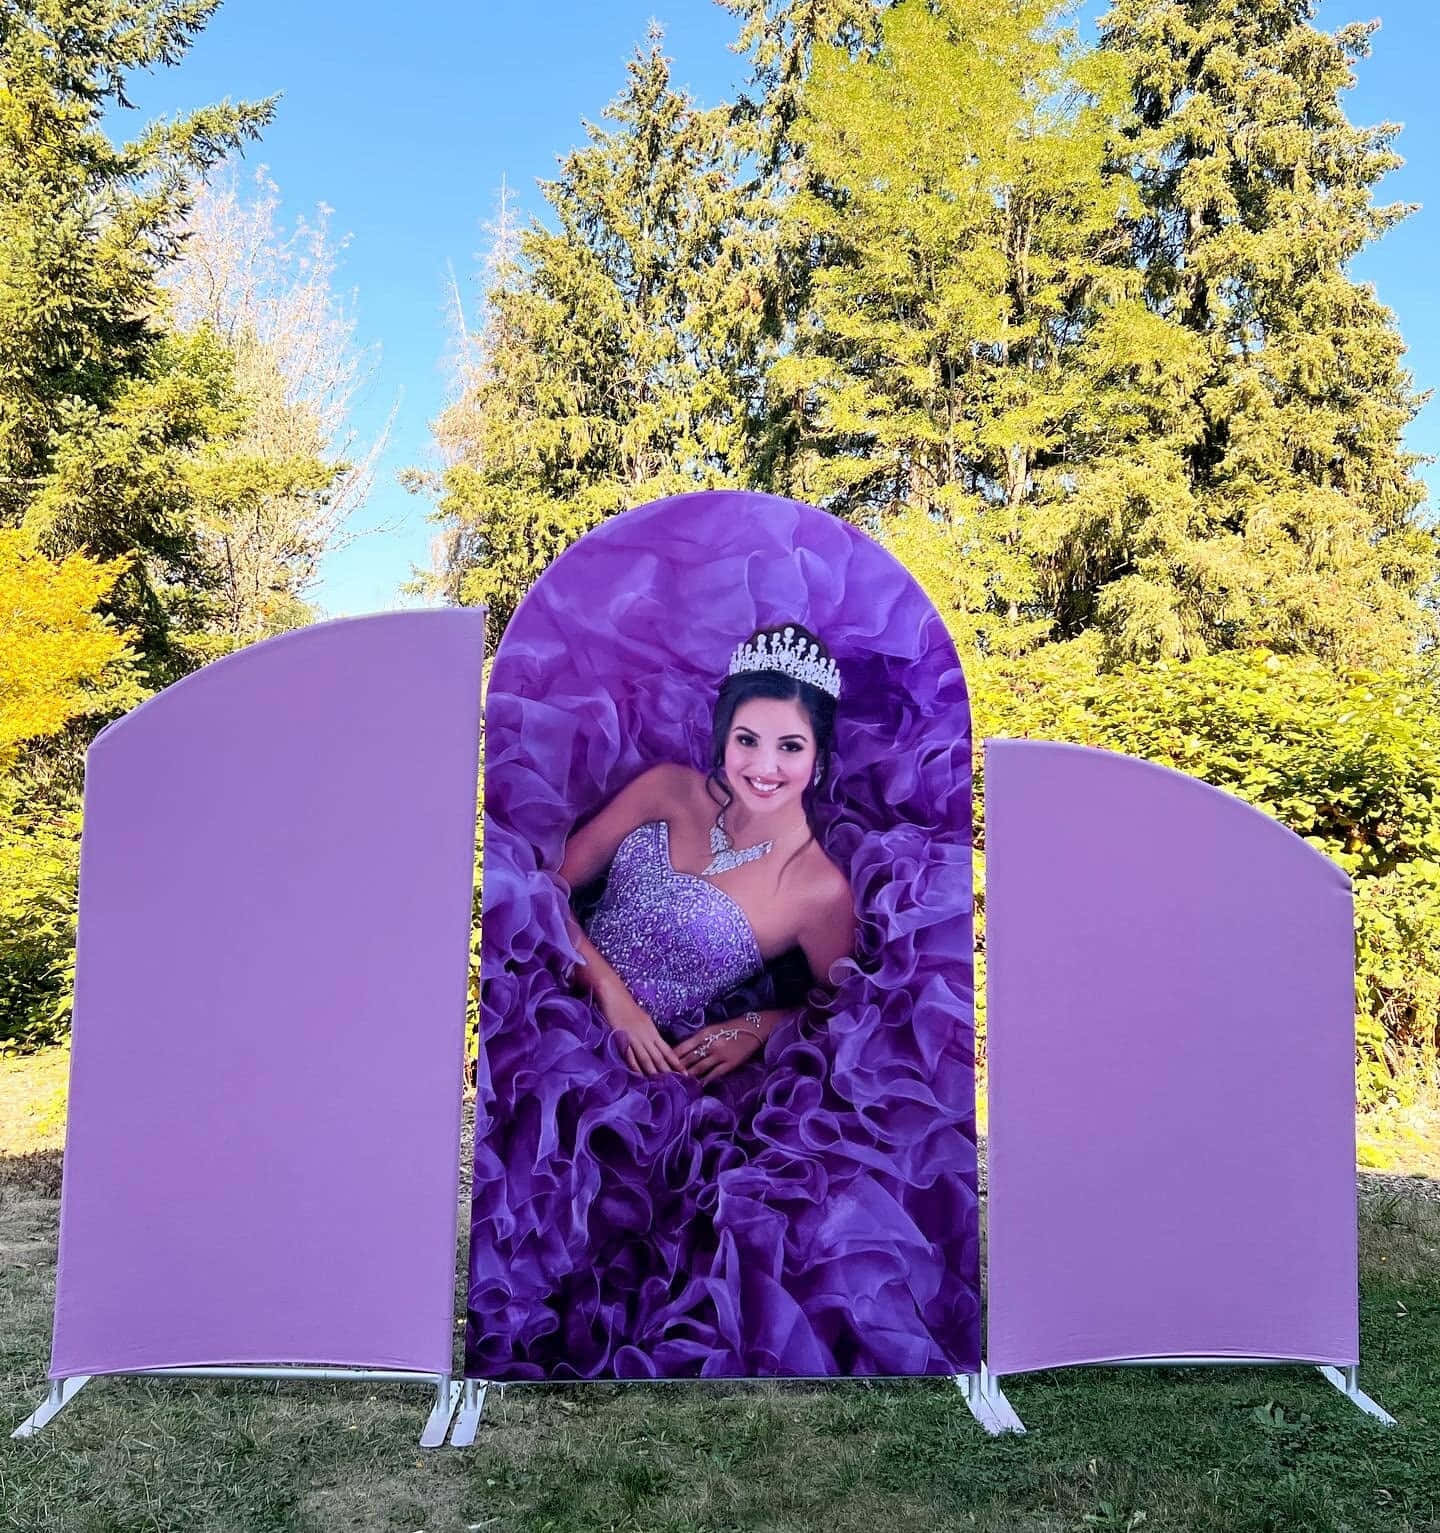 A Purple Backdrop With A Photo Of A Girl In A Purple Dress